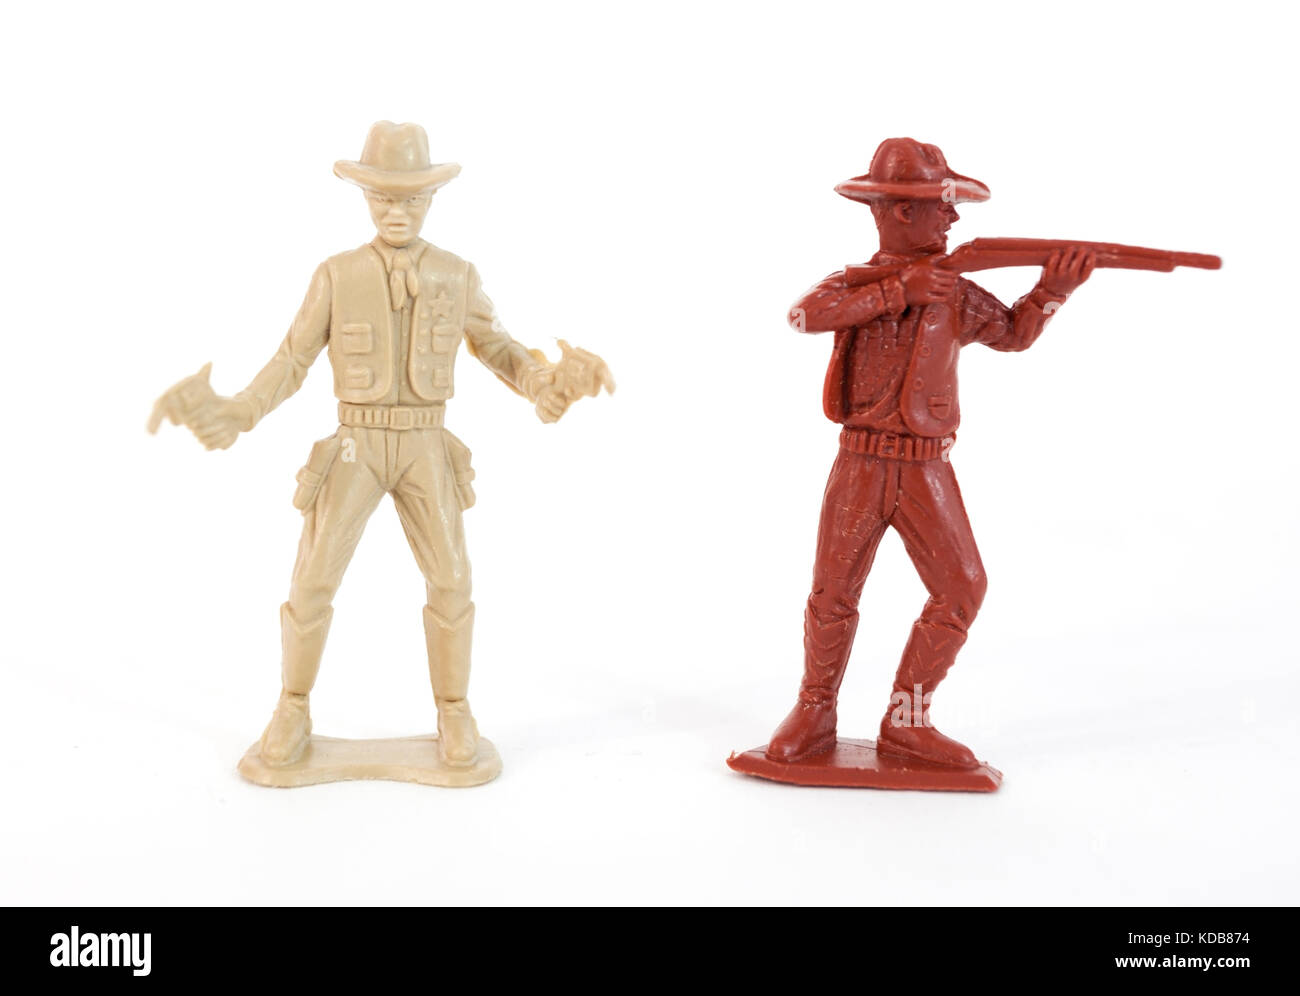 Plastic soldier and cowboy toys. Stock Photo